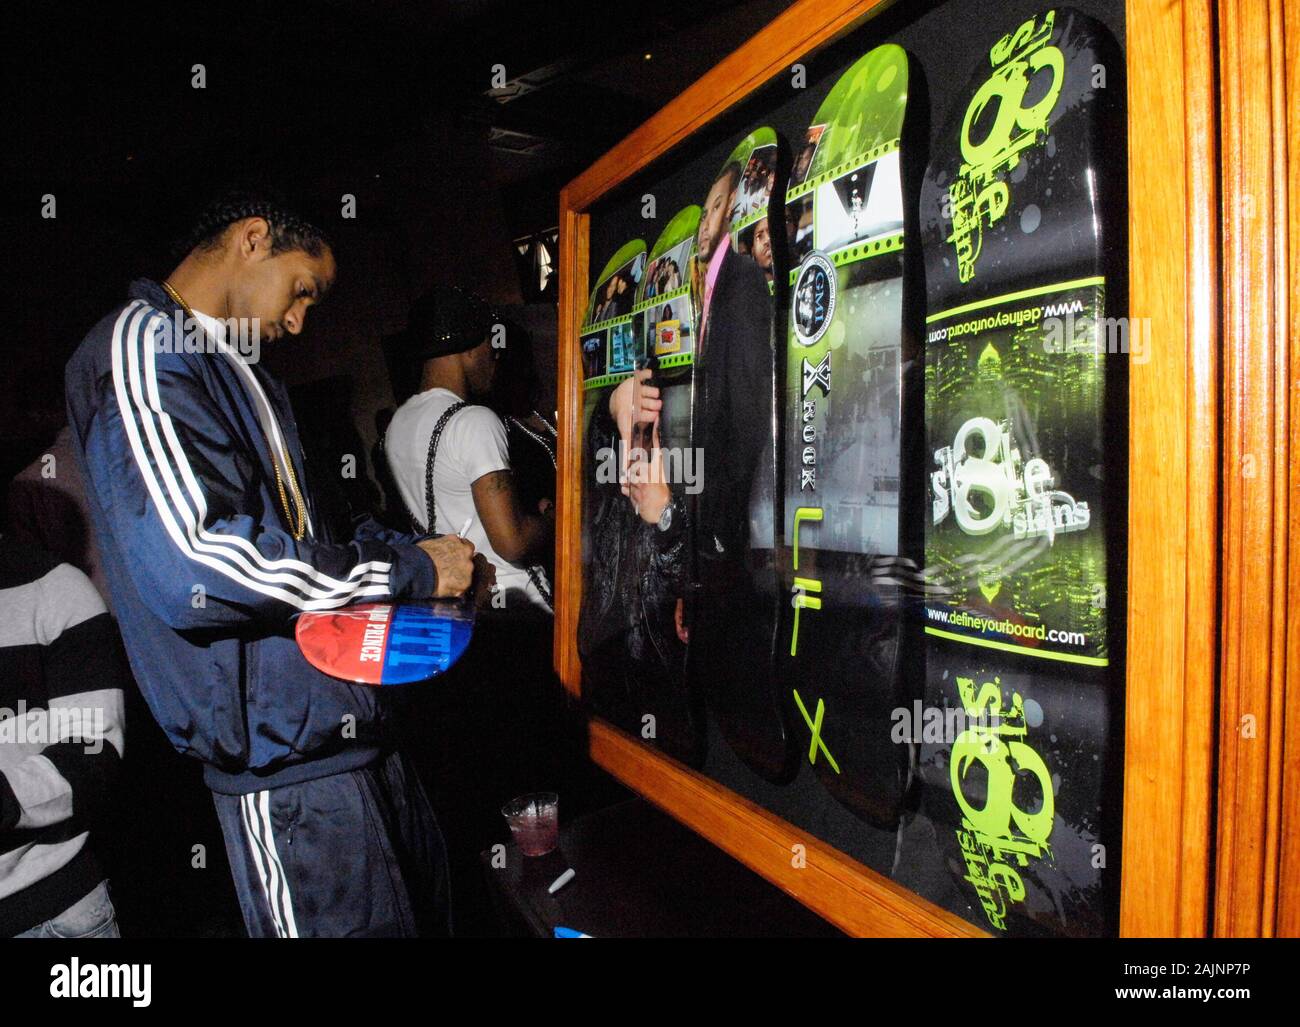 Rapper Nipsey Hussle attends a Grammy gifting suite at The Roosevelt Hotel on January 29, 2010 in Hollywood, California. Stock Photo